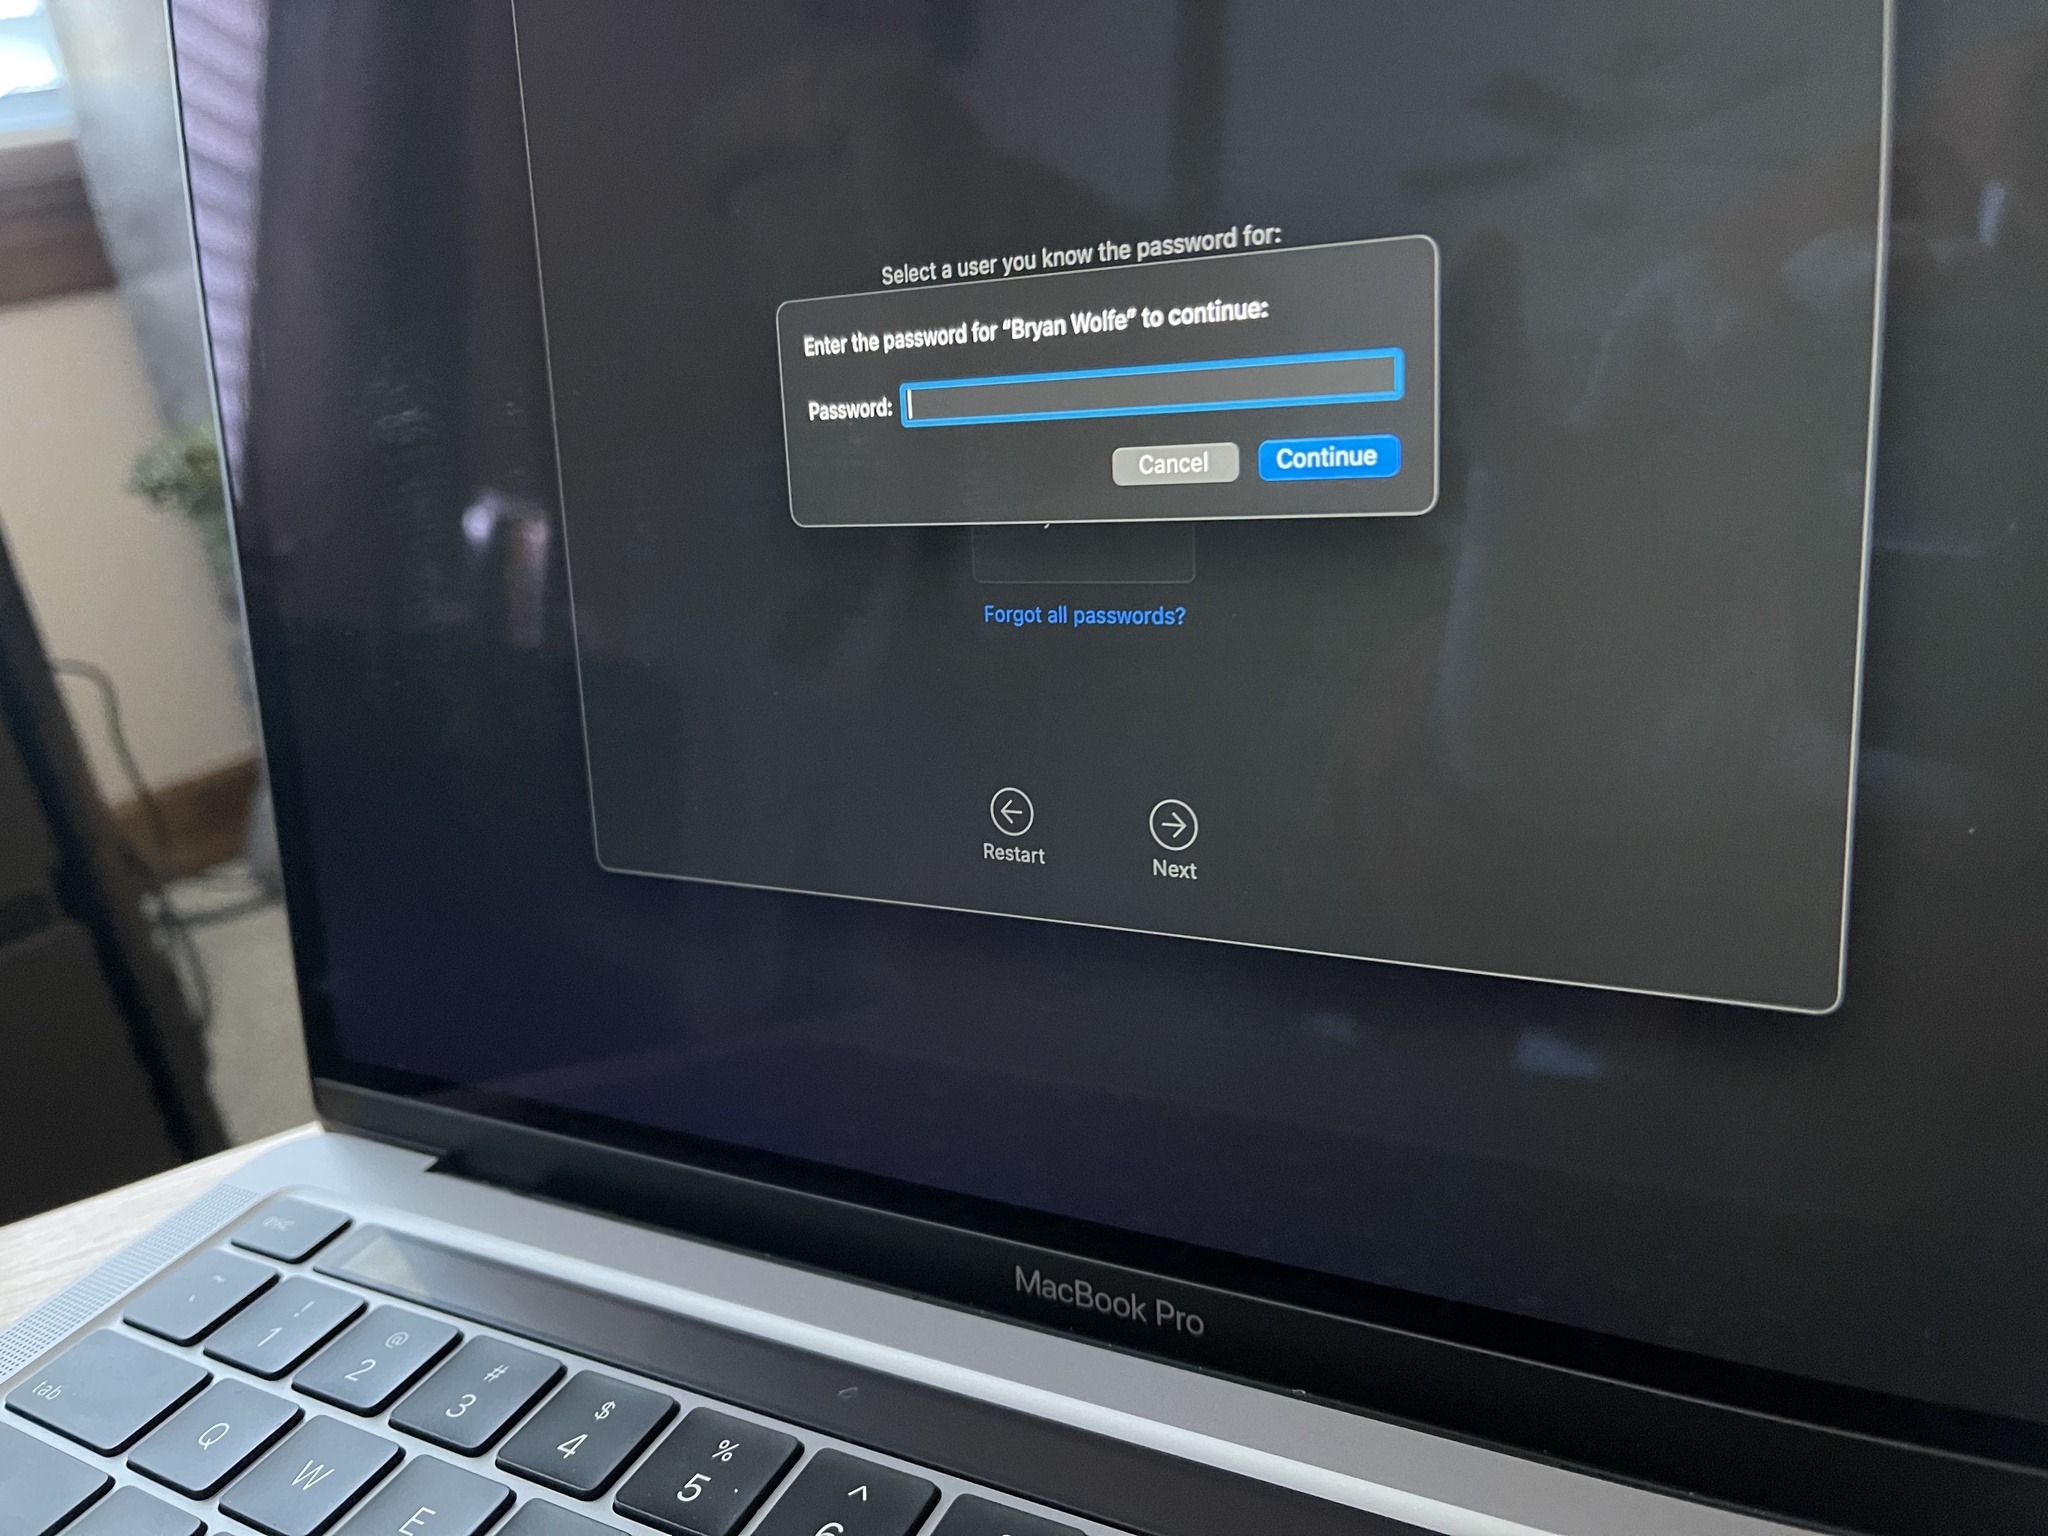 To restore your Mac to factory settings, log into the user account using the password. Choose Continue.